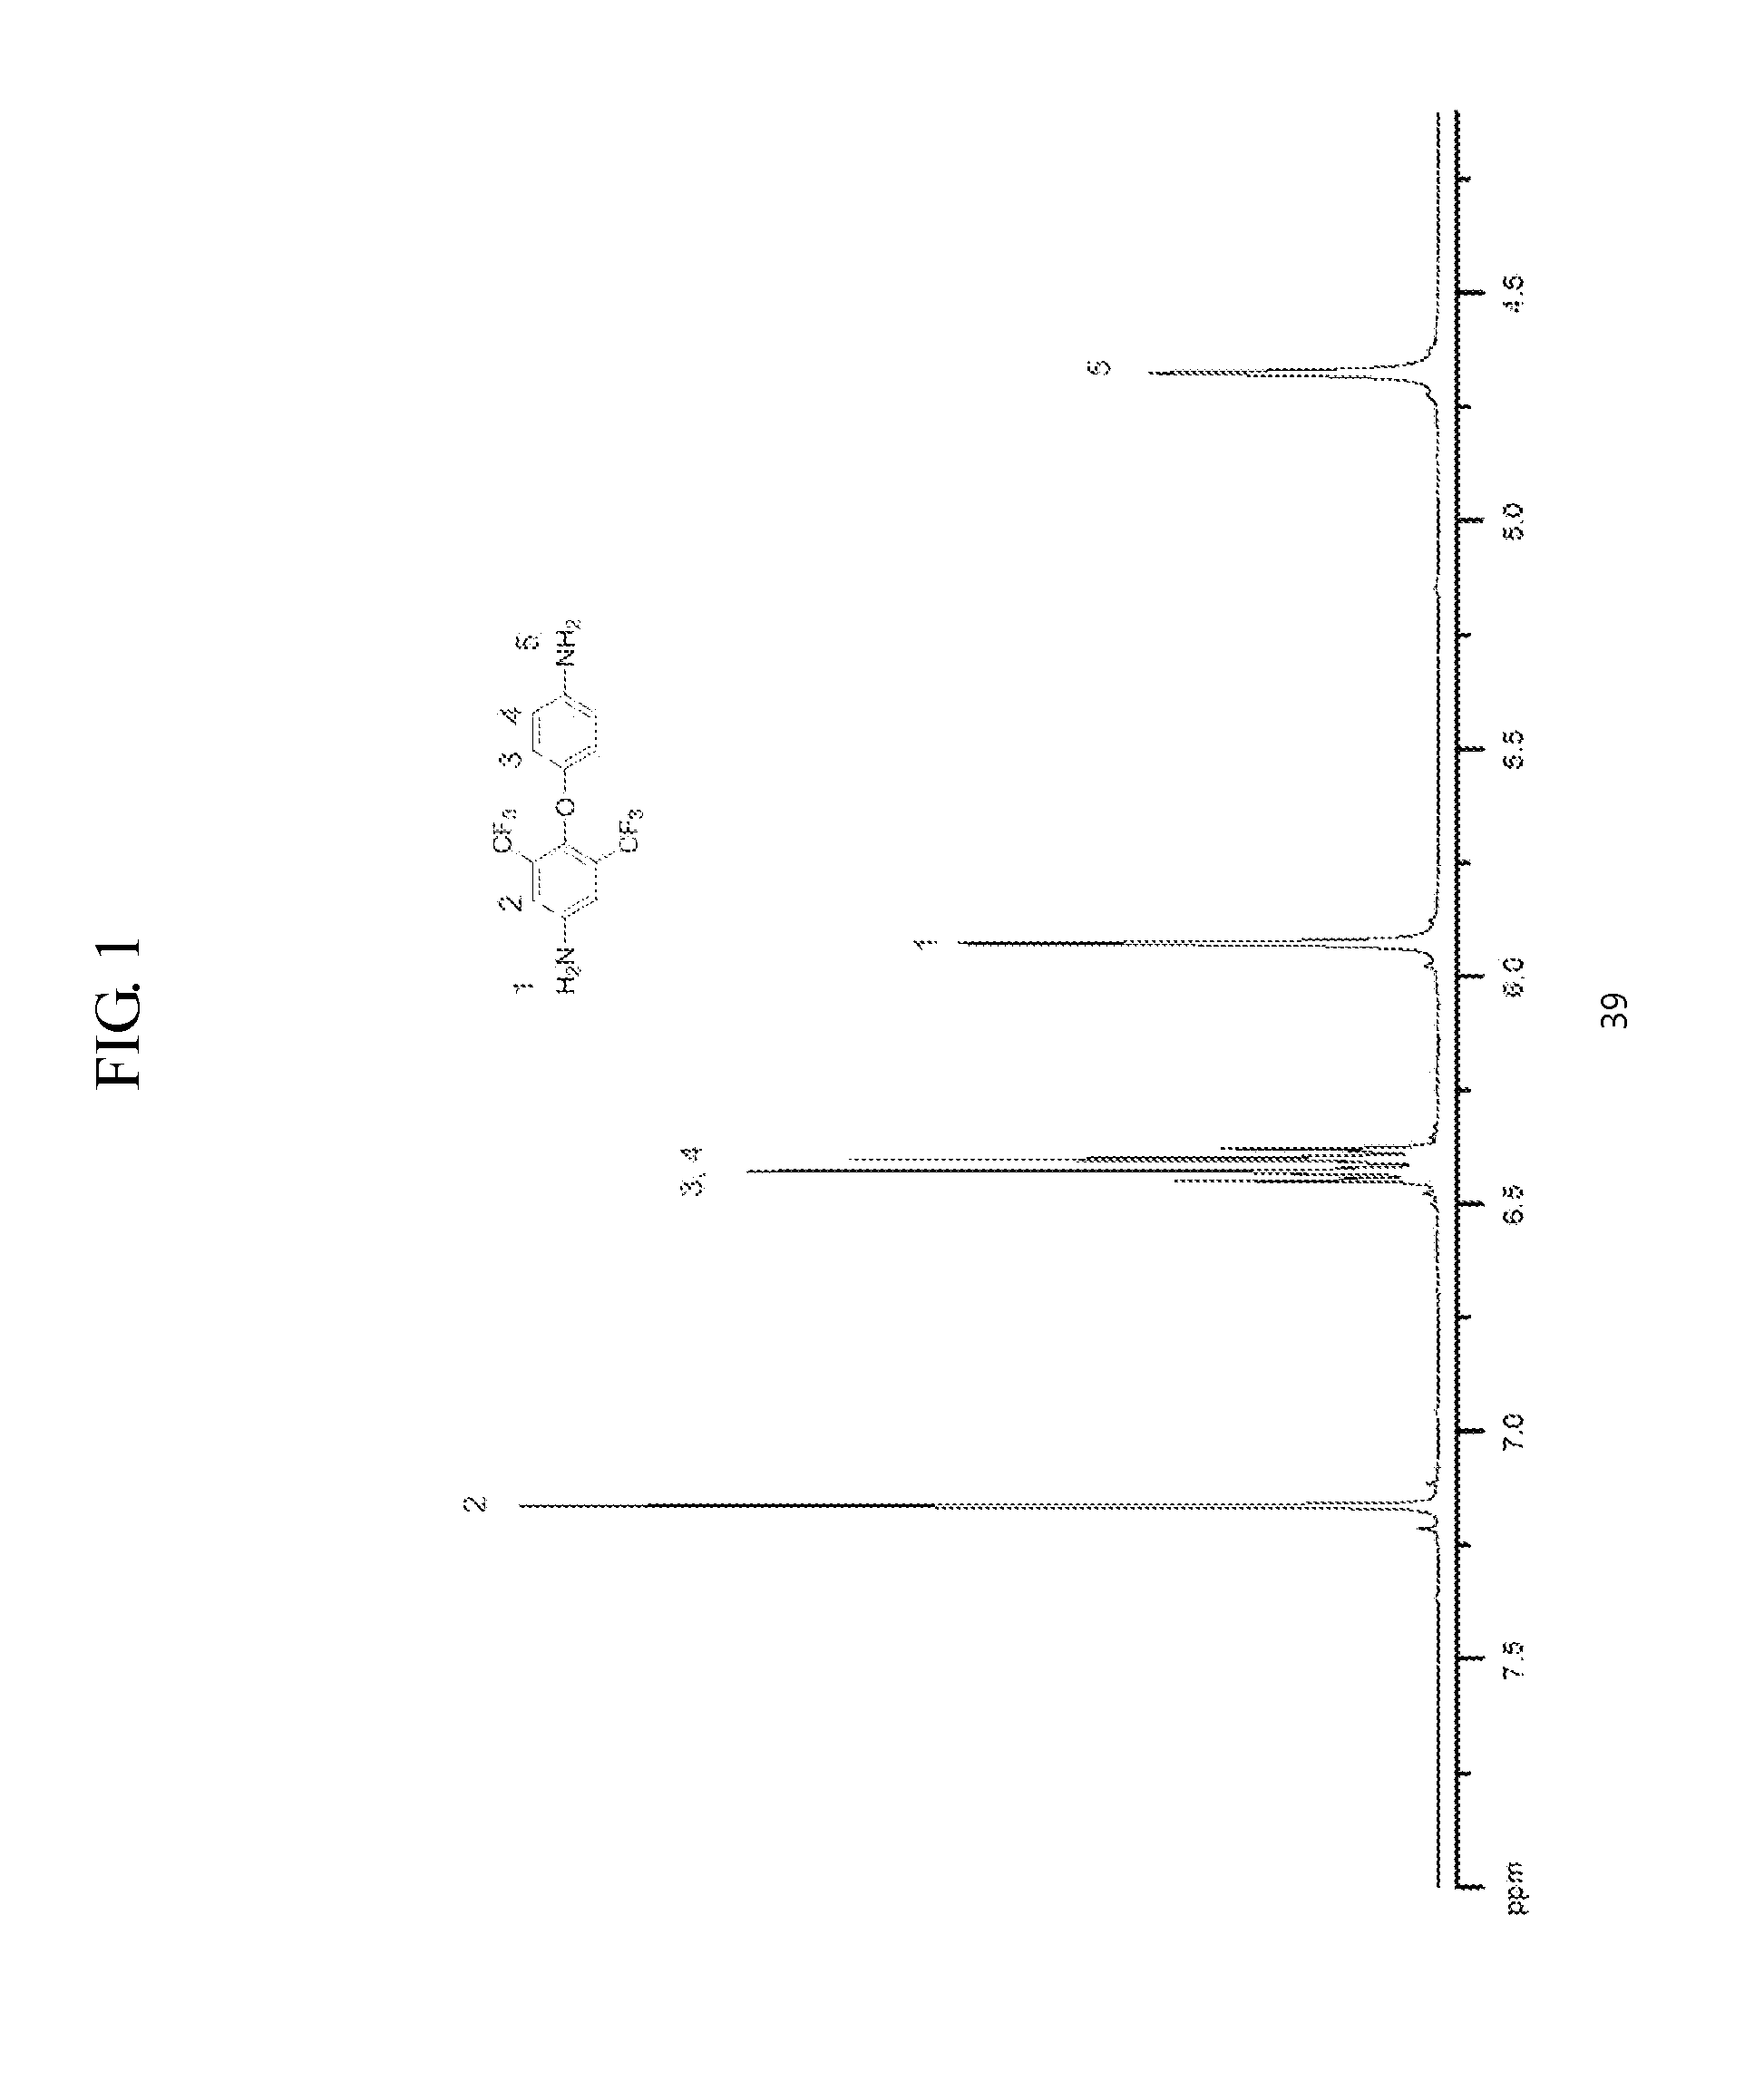 Asymmetric Diamine Compounds Containing Two Functional Groups and Polymers Therefrom